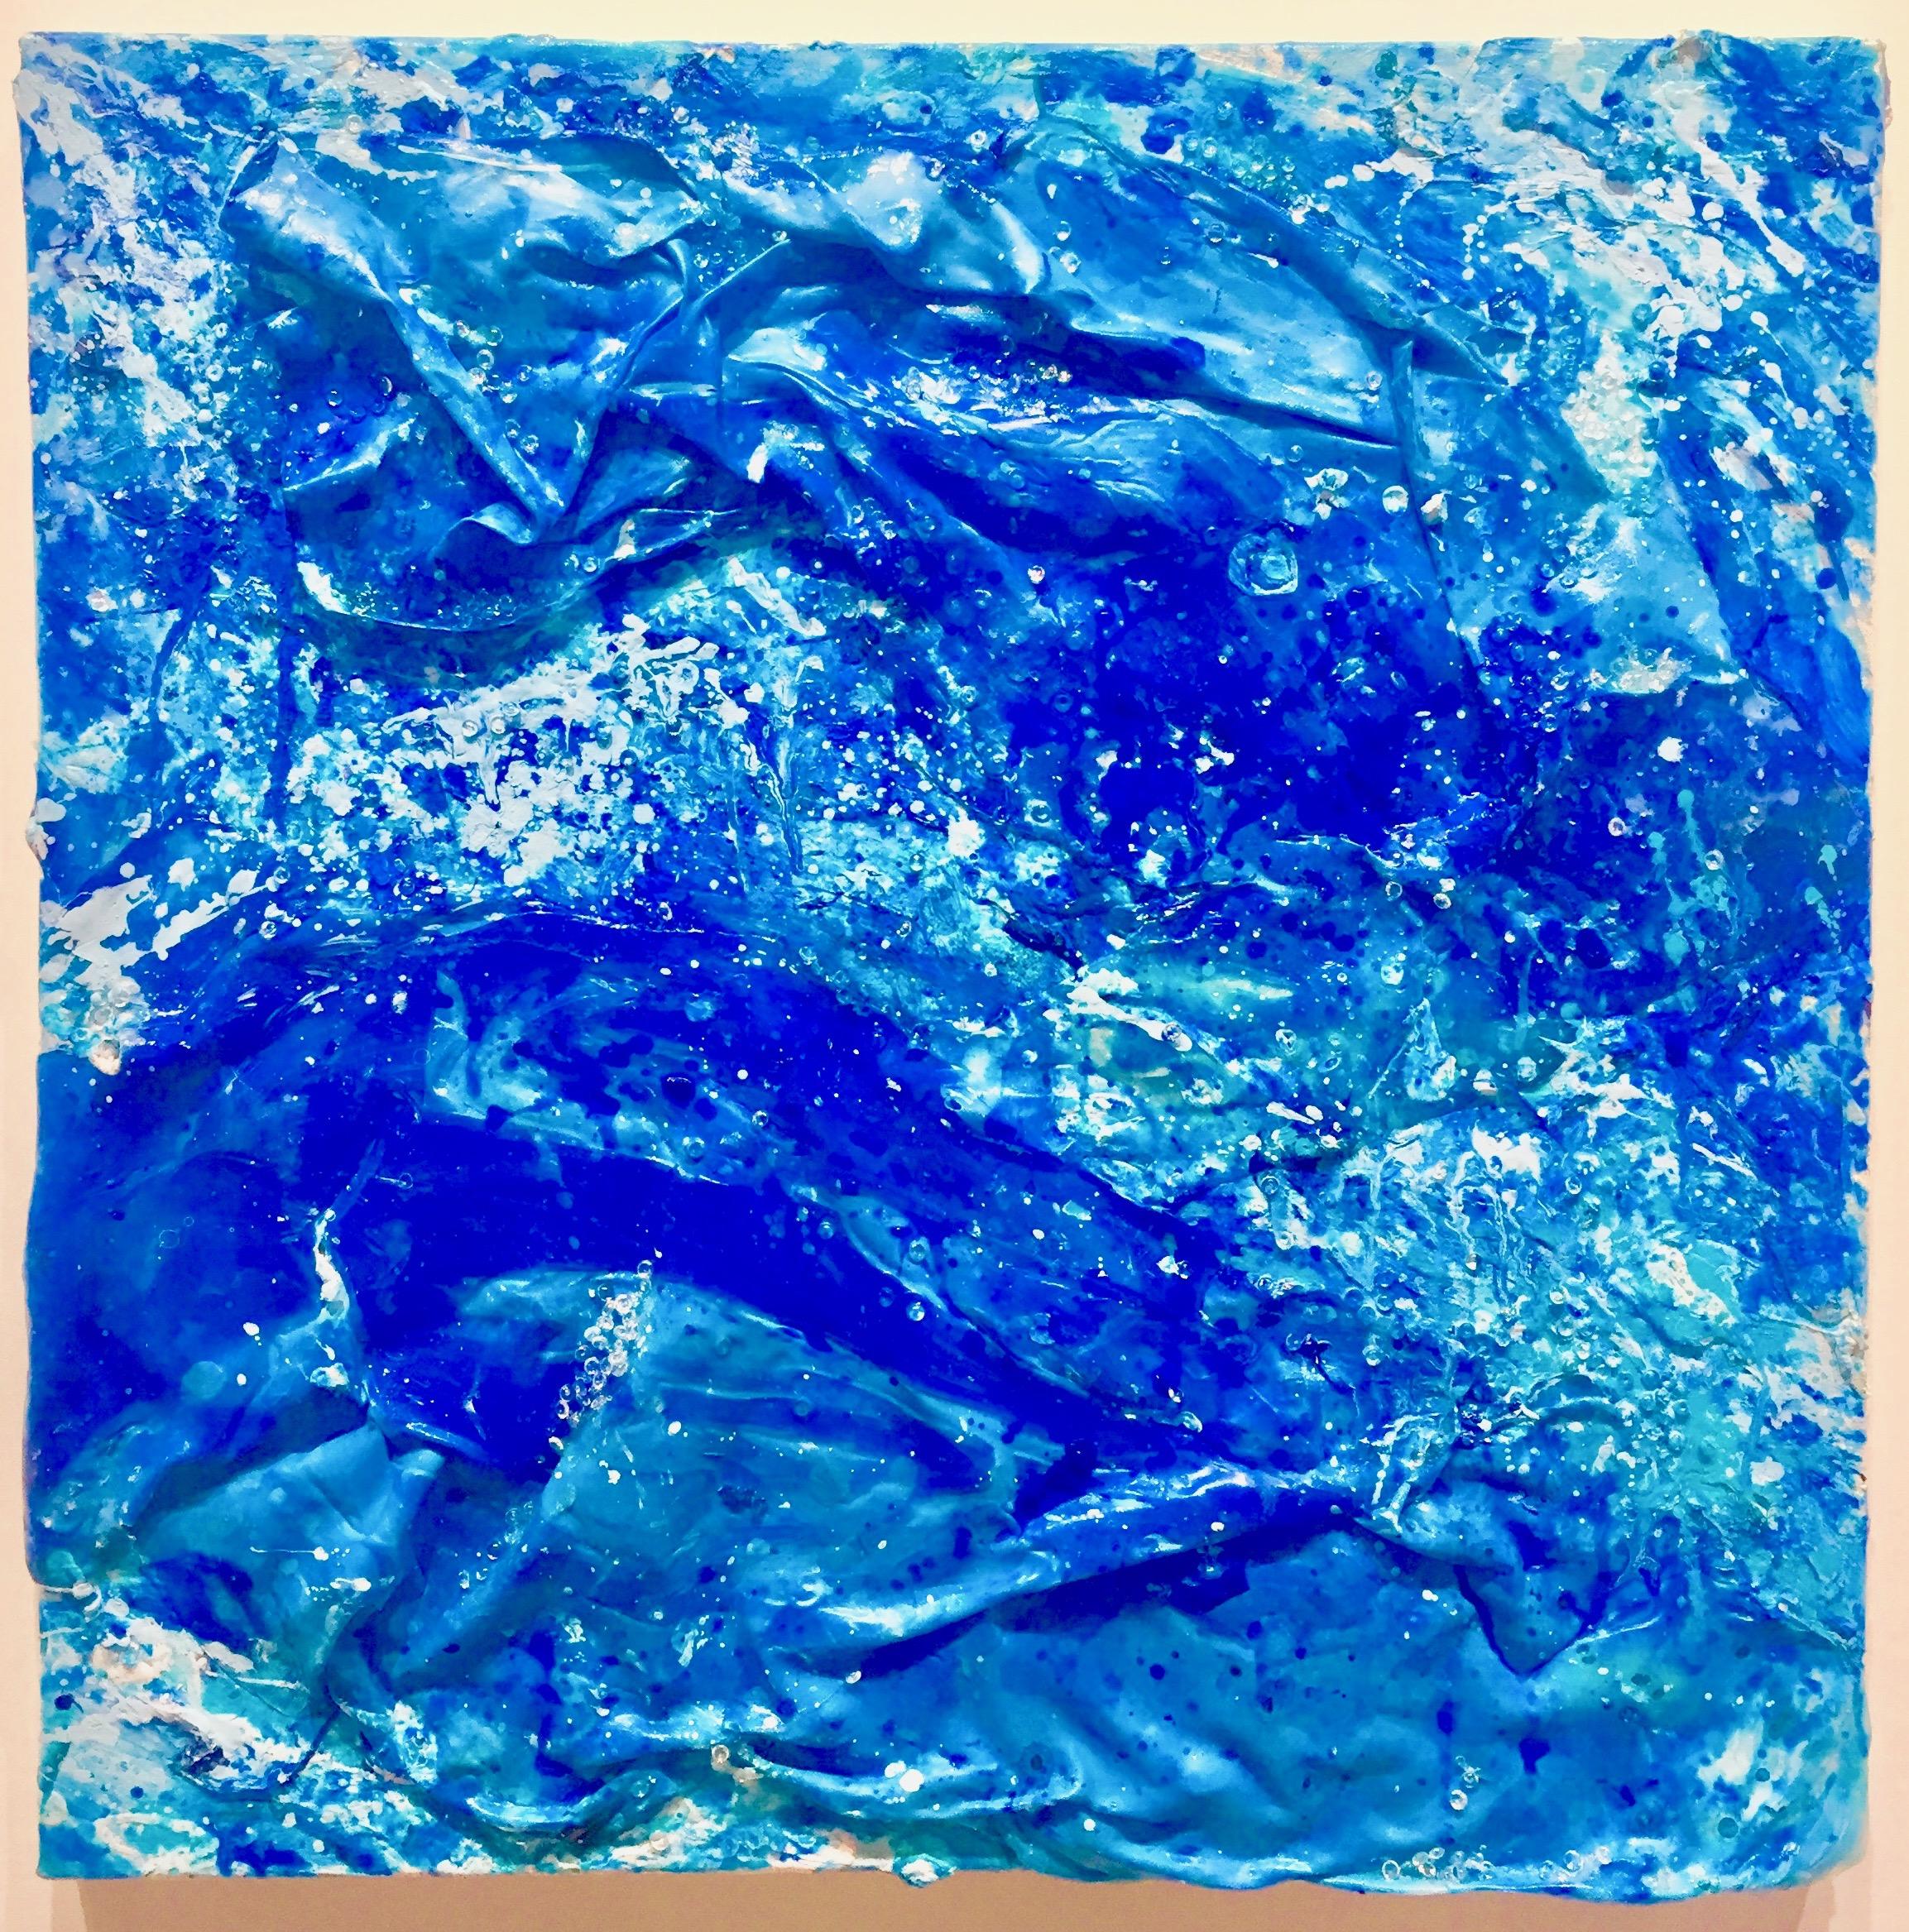 This is part of a series of 4 square paintings created in 2018, a laboratory for investigating the color blue, created by collaging with acrylic paint skins and other material that create texture. They were inspired by the ocean.